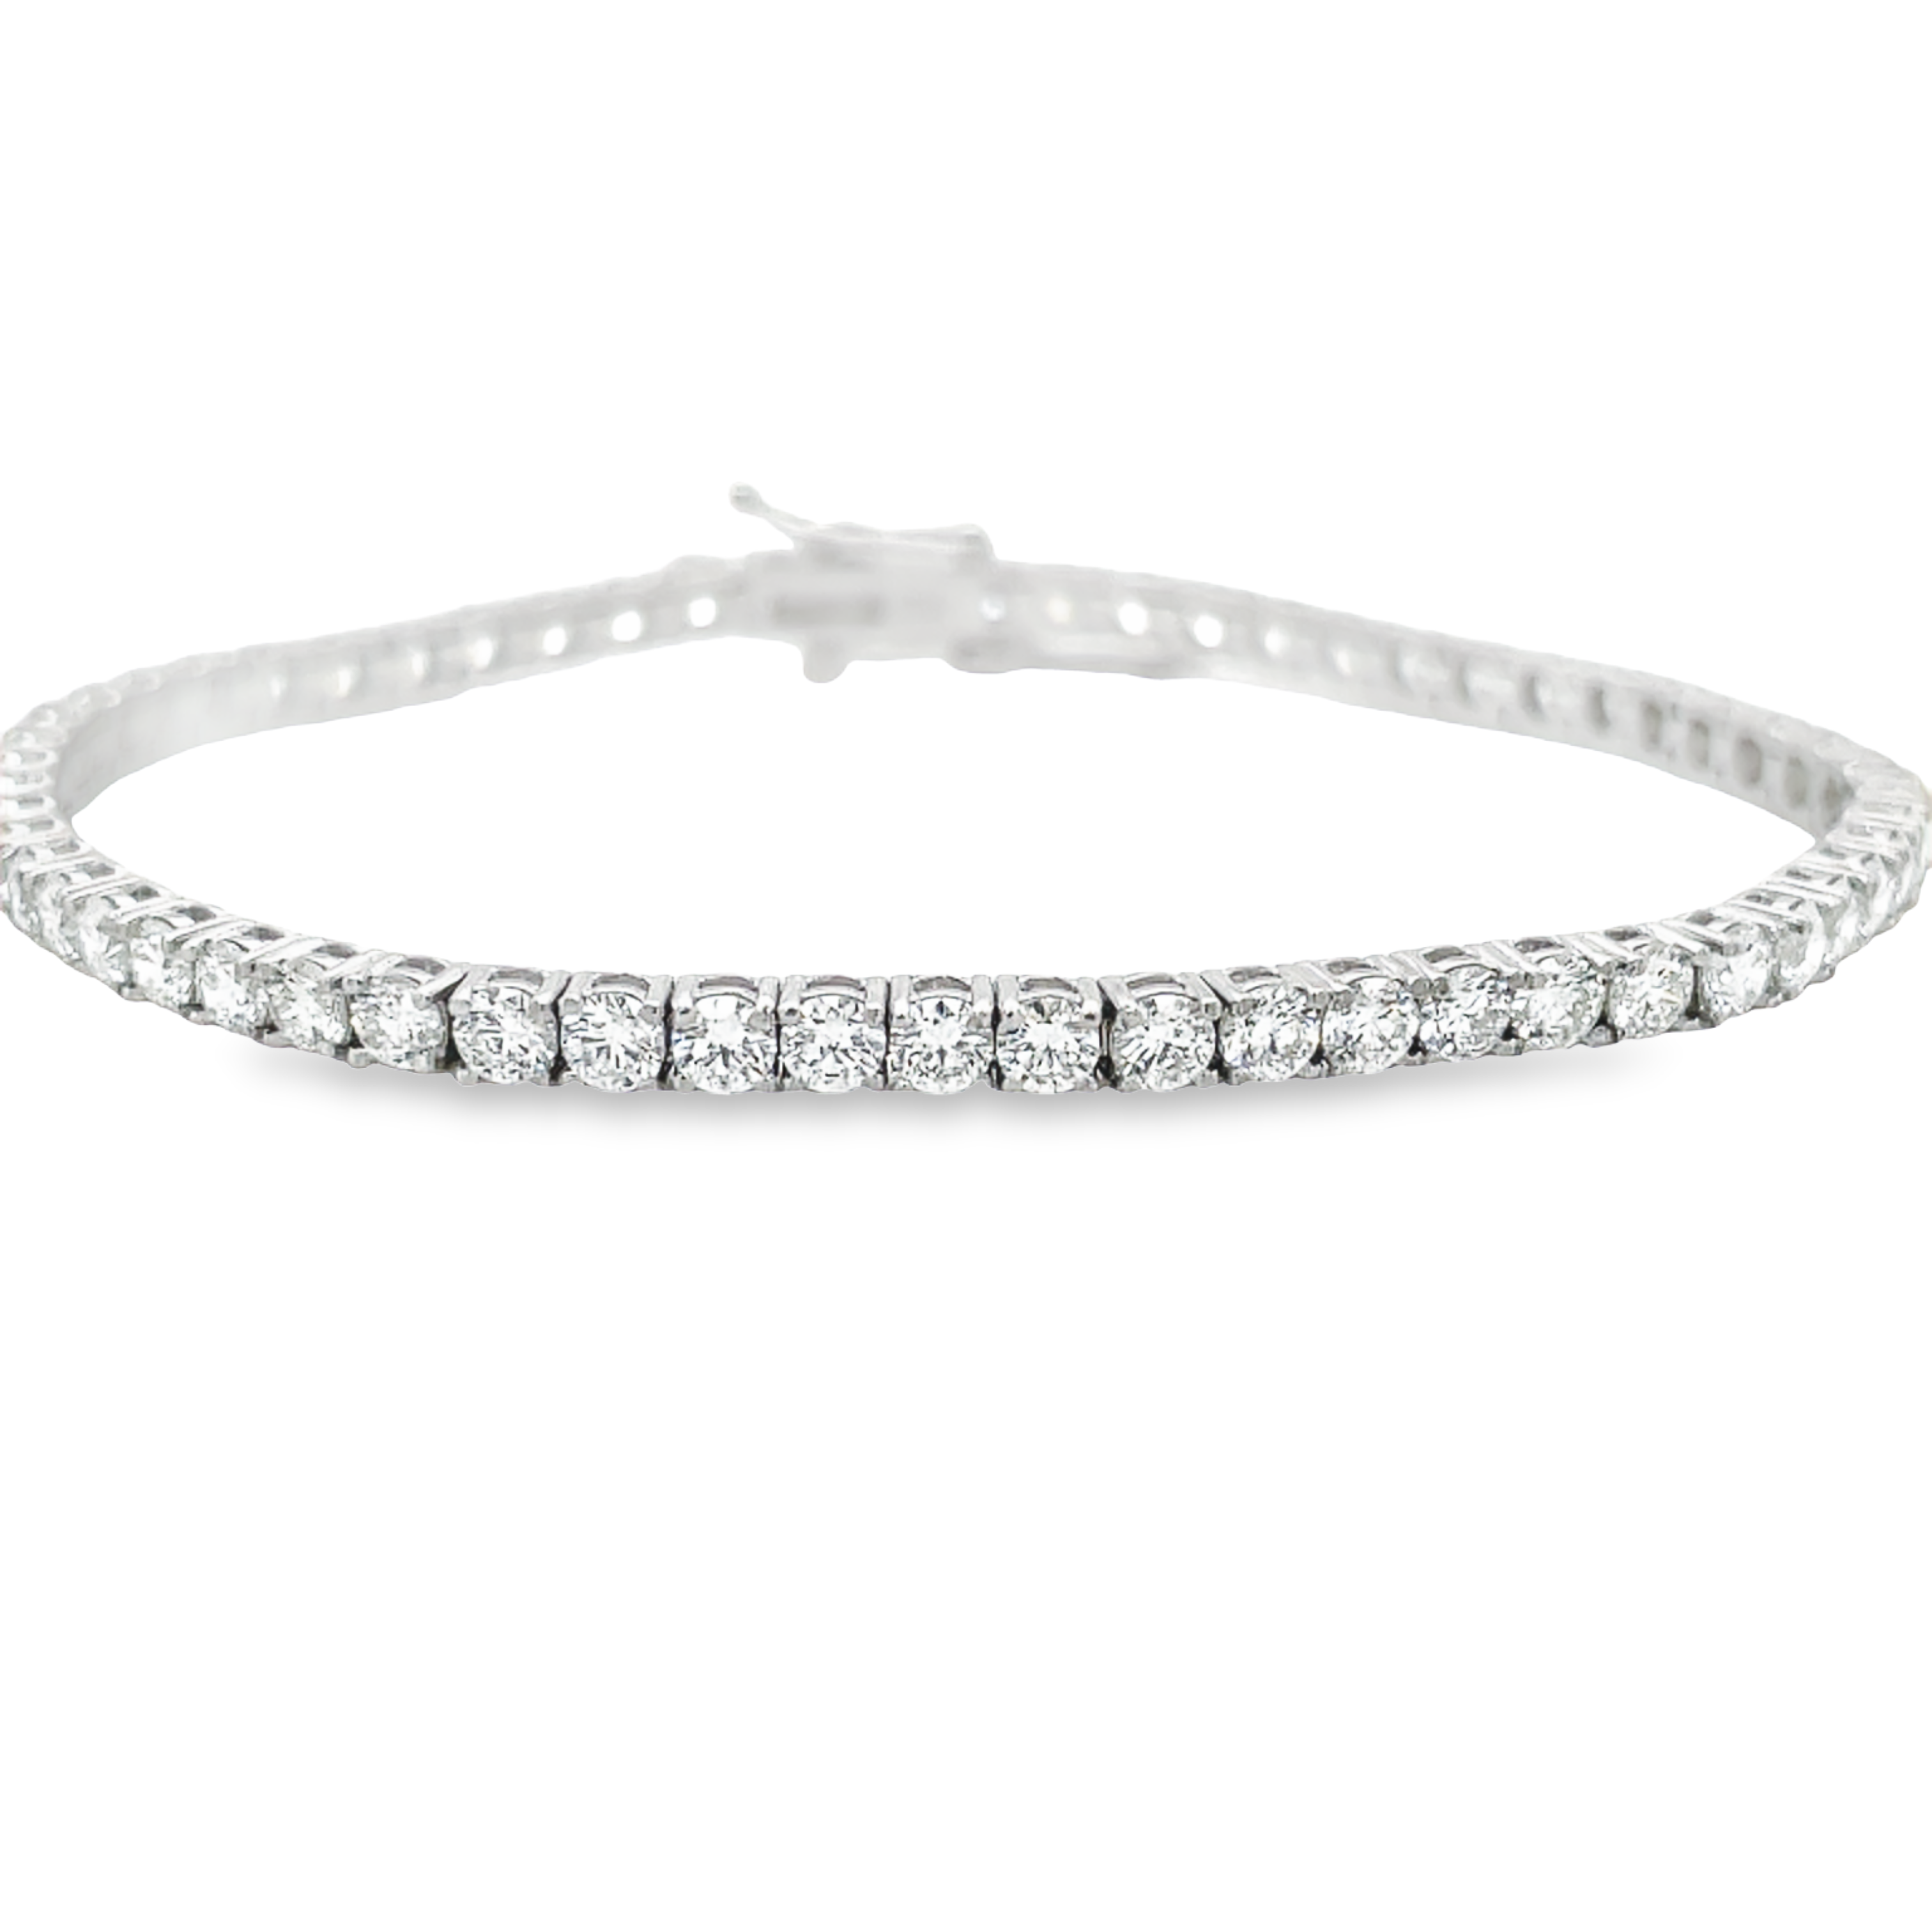 Gleaming 5.00 cts of E/F colored diamonds, with VS-1 clarity, are prong set in 14k white gold to craft this 7" long, dazzling diamond line tennis bracelet.